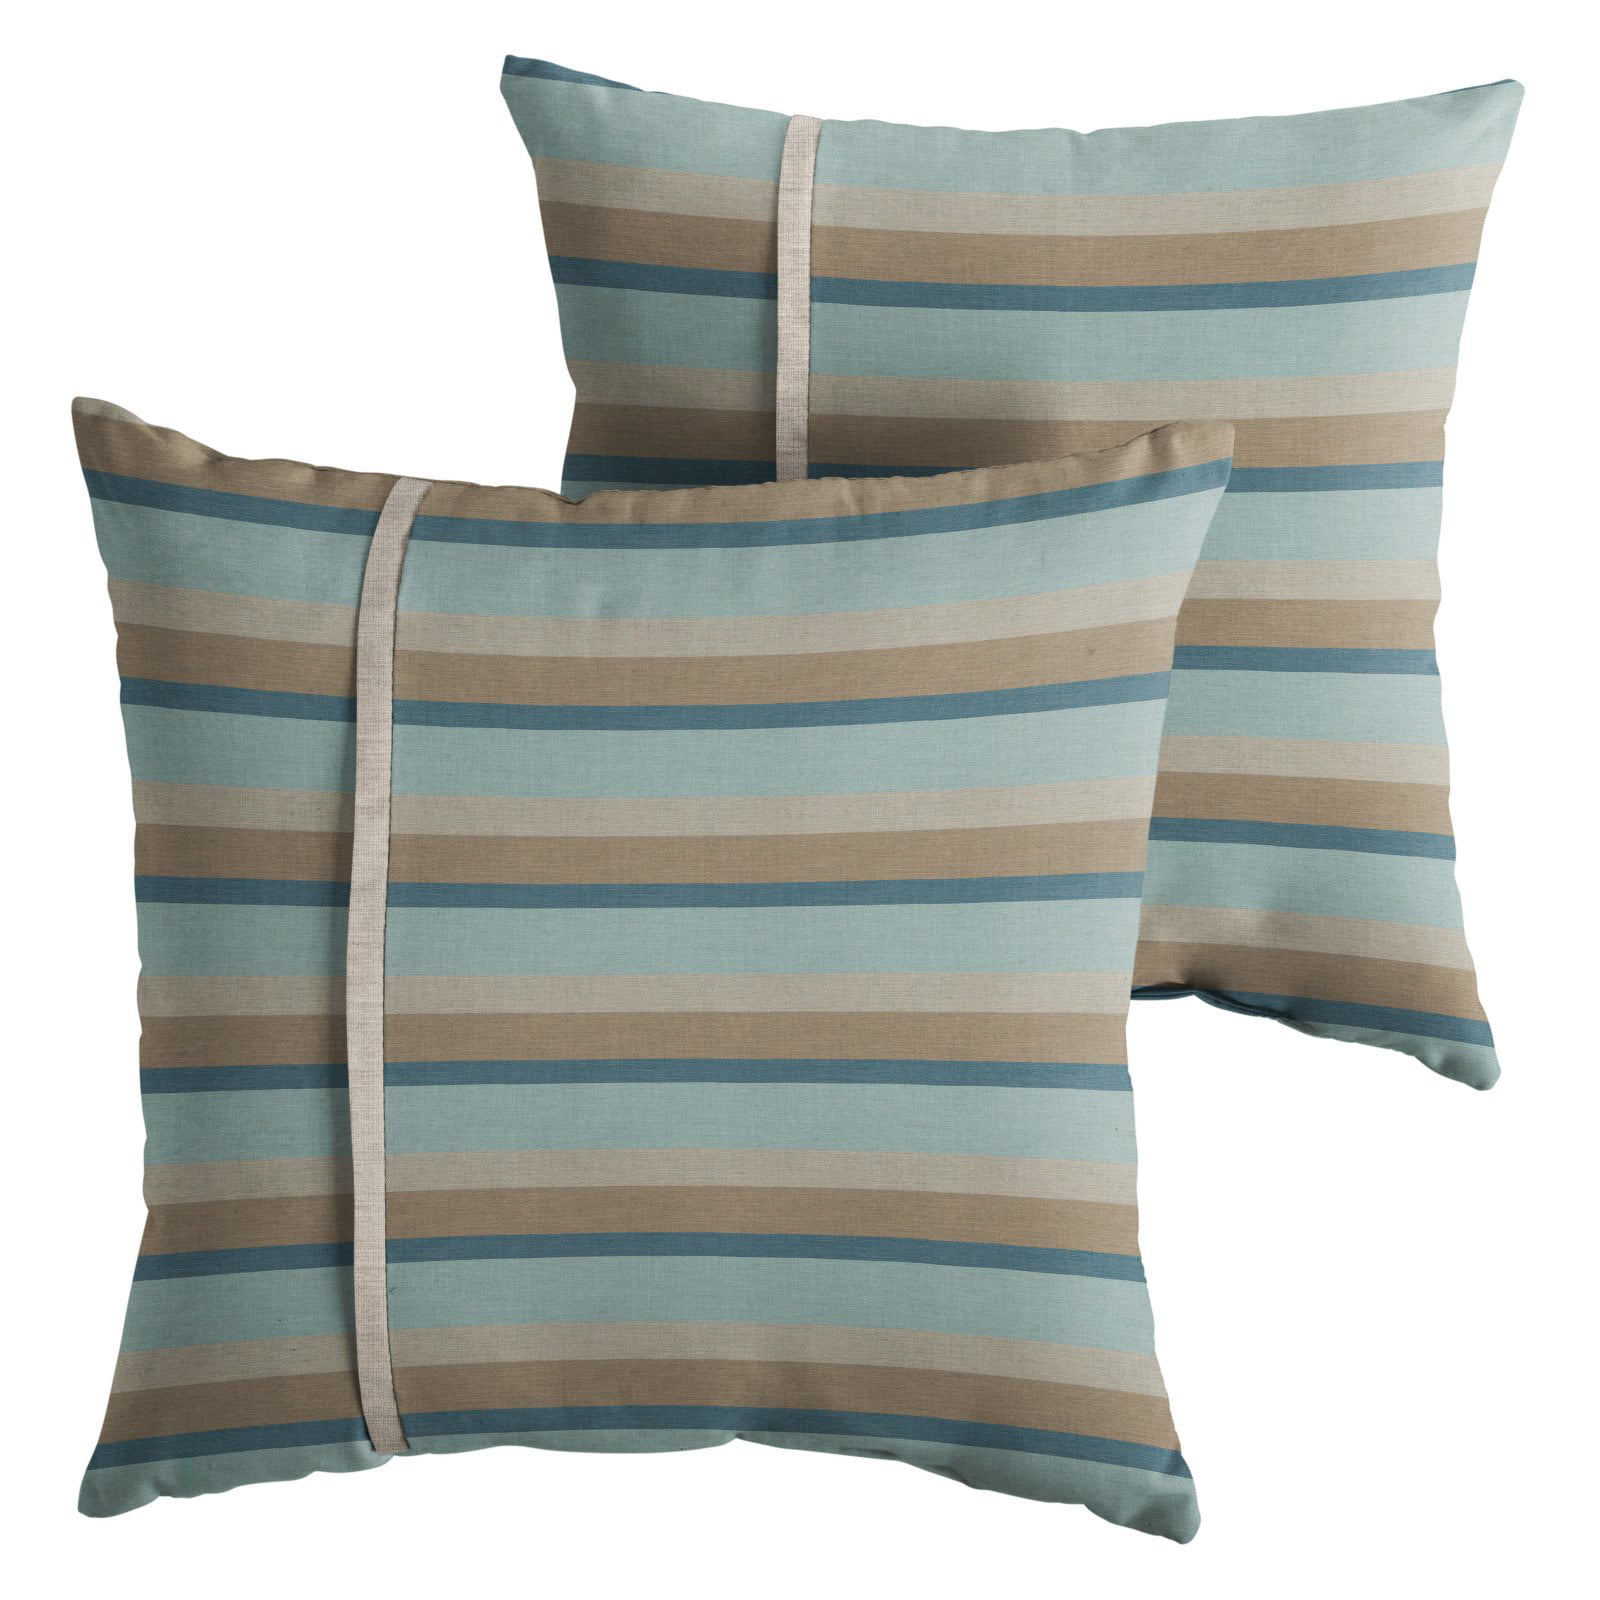 Mozaic Company AZPS6812 Indoor Outdoor Sunbrella Square Pillow with Corded Edges Canvas Teal Green Set of 2 16 inches